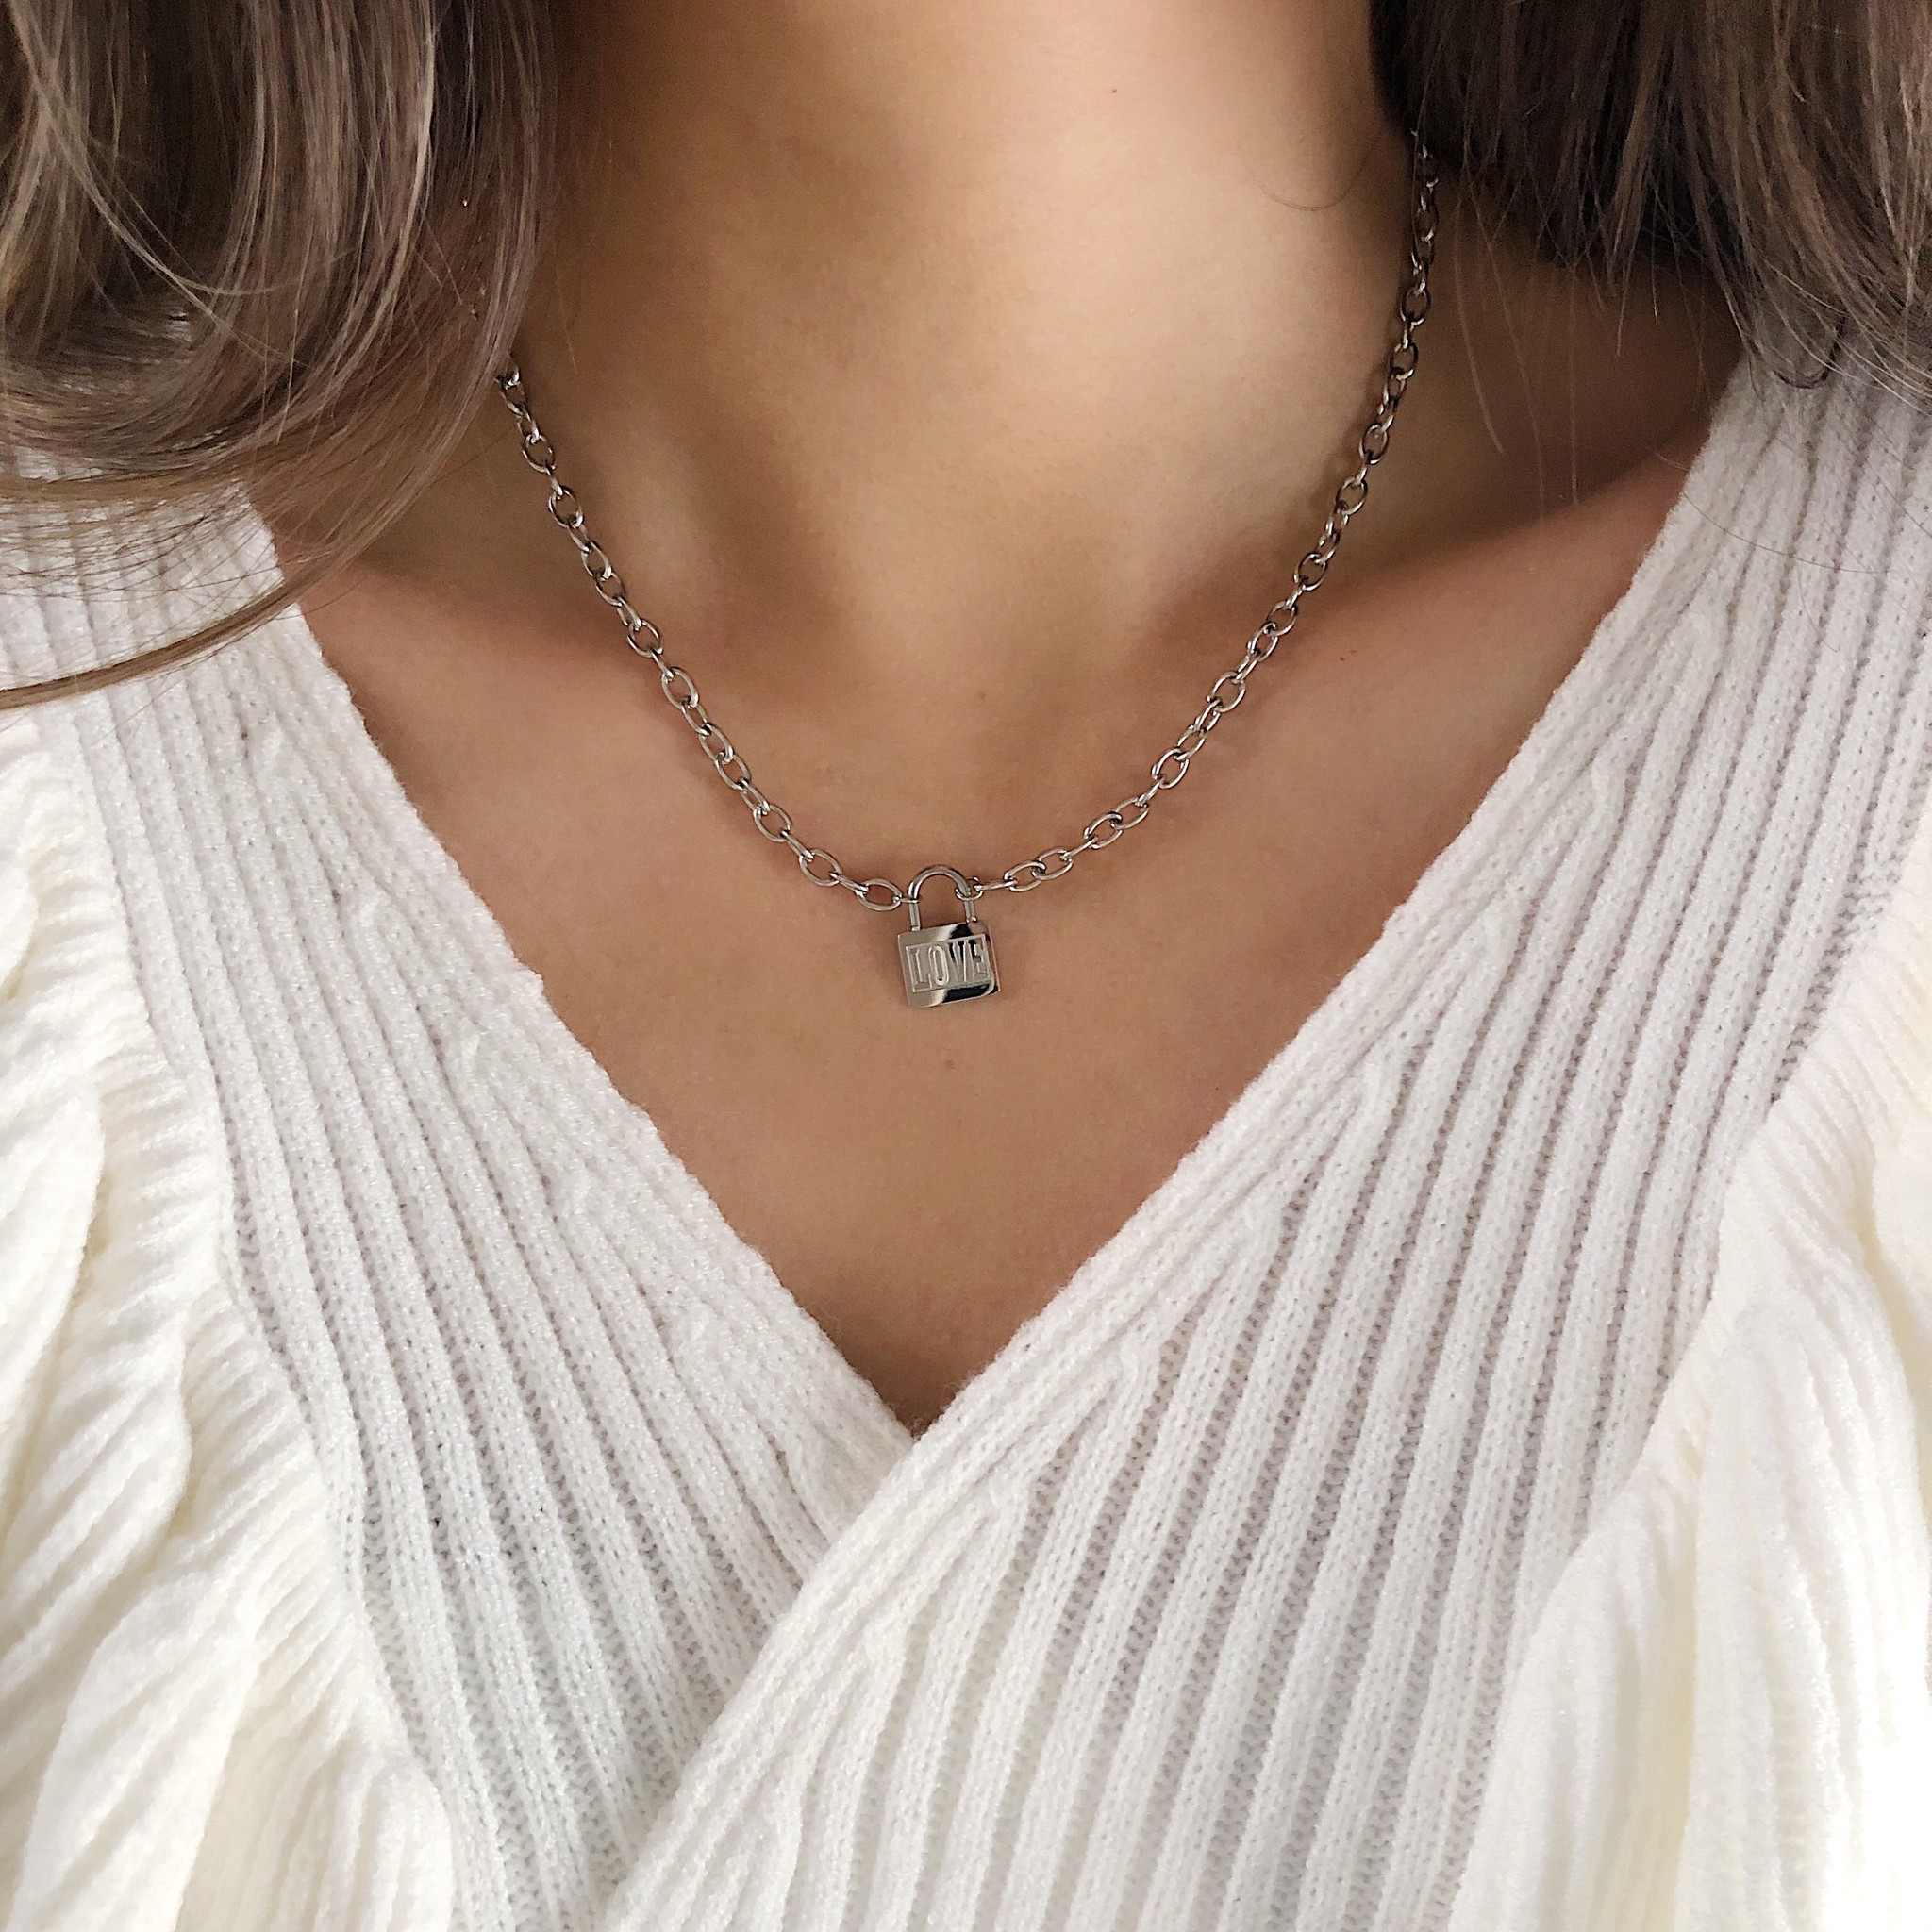 Petite Lock Necklace Silver  The Wholesome Store